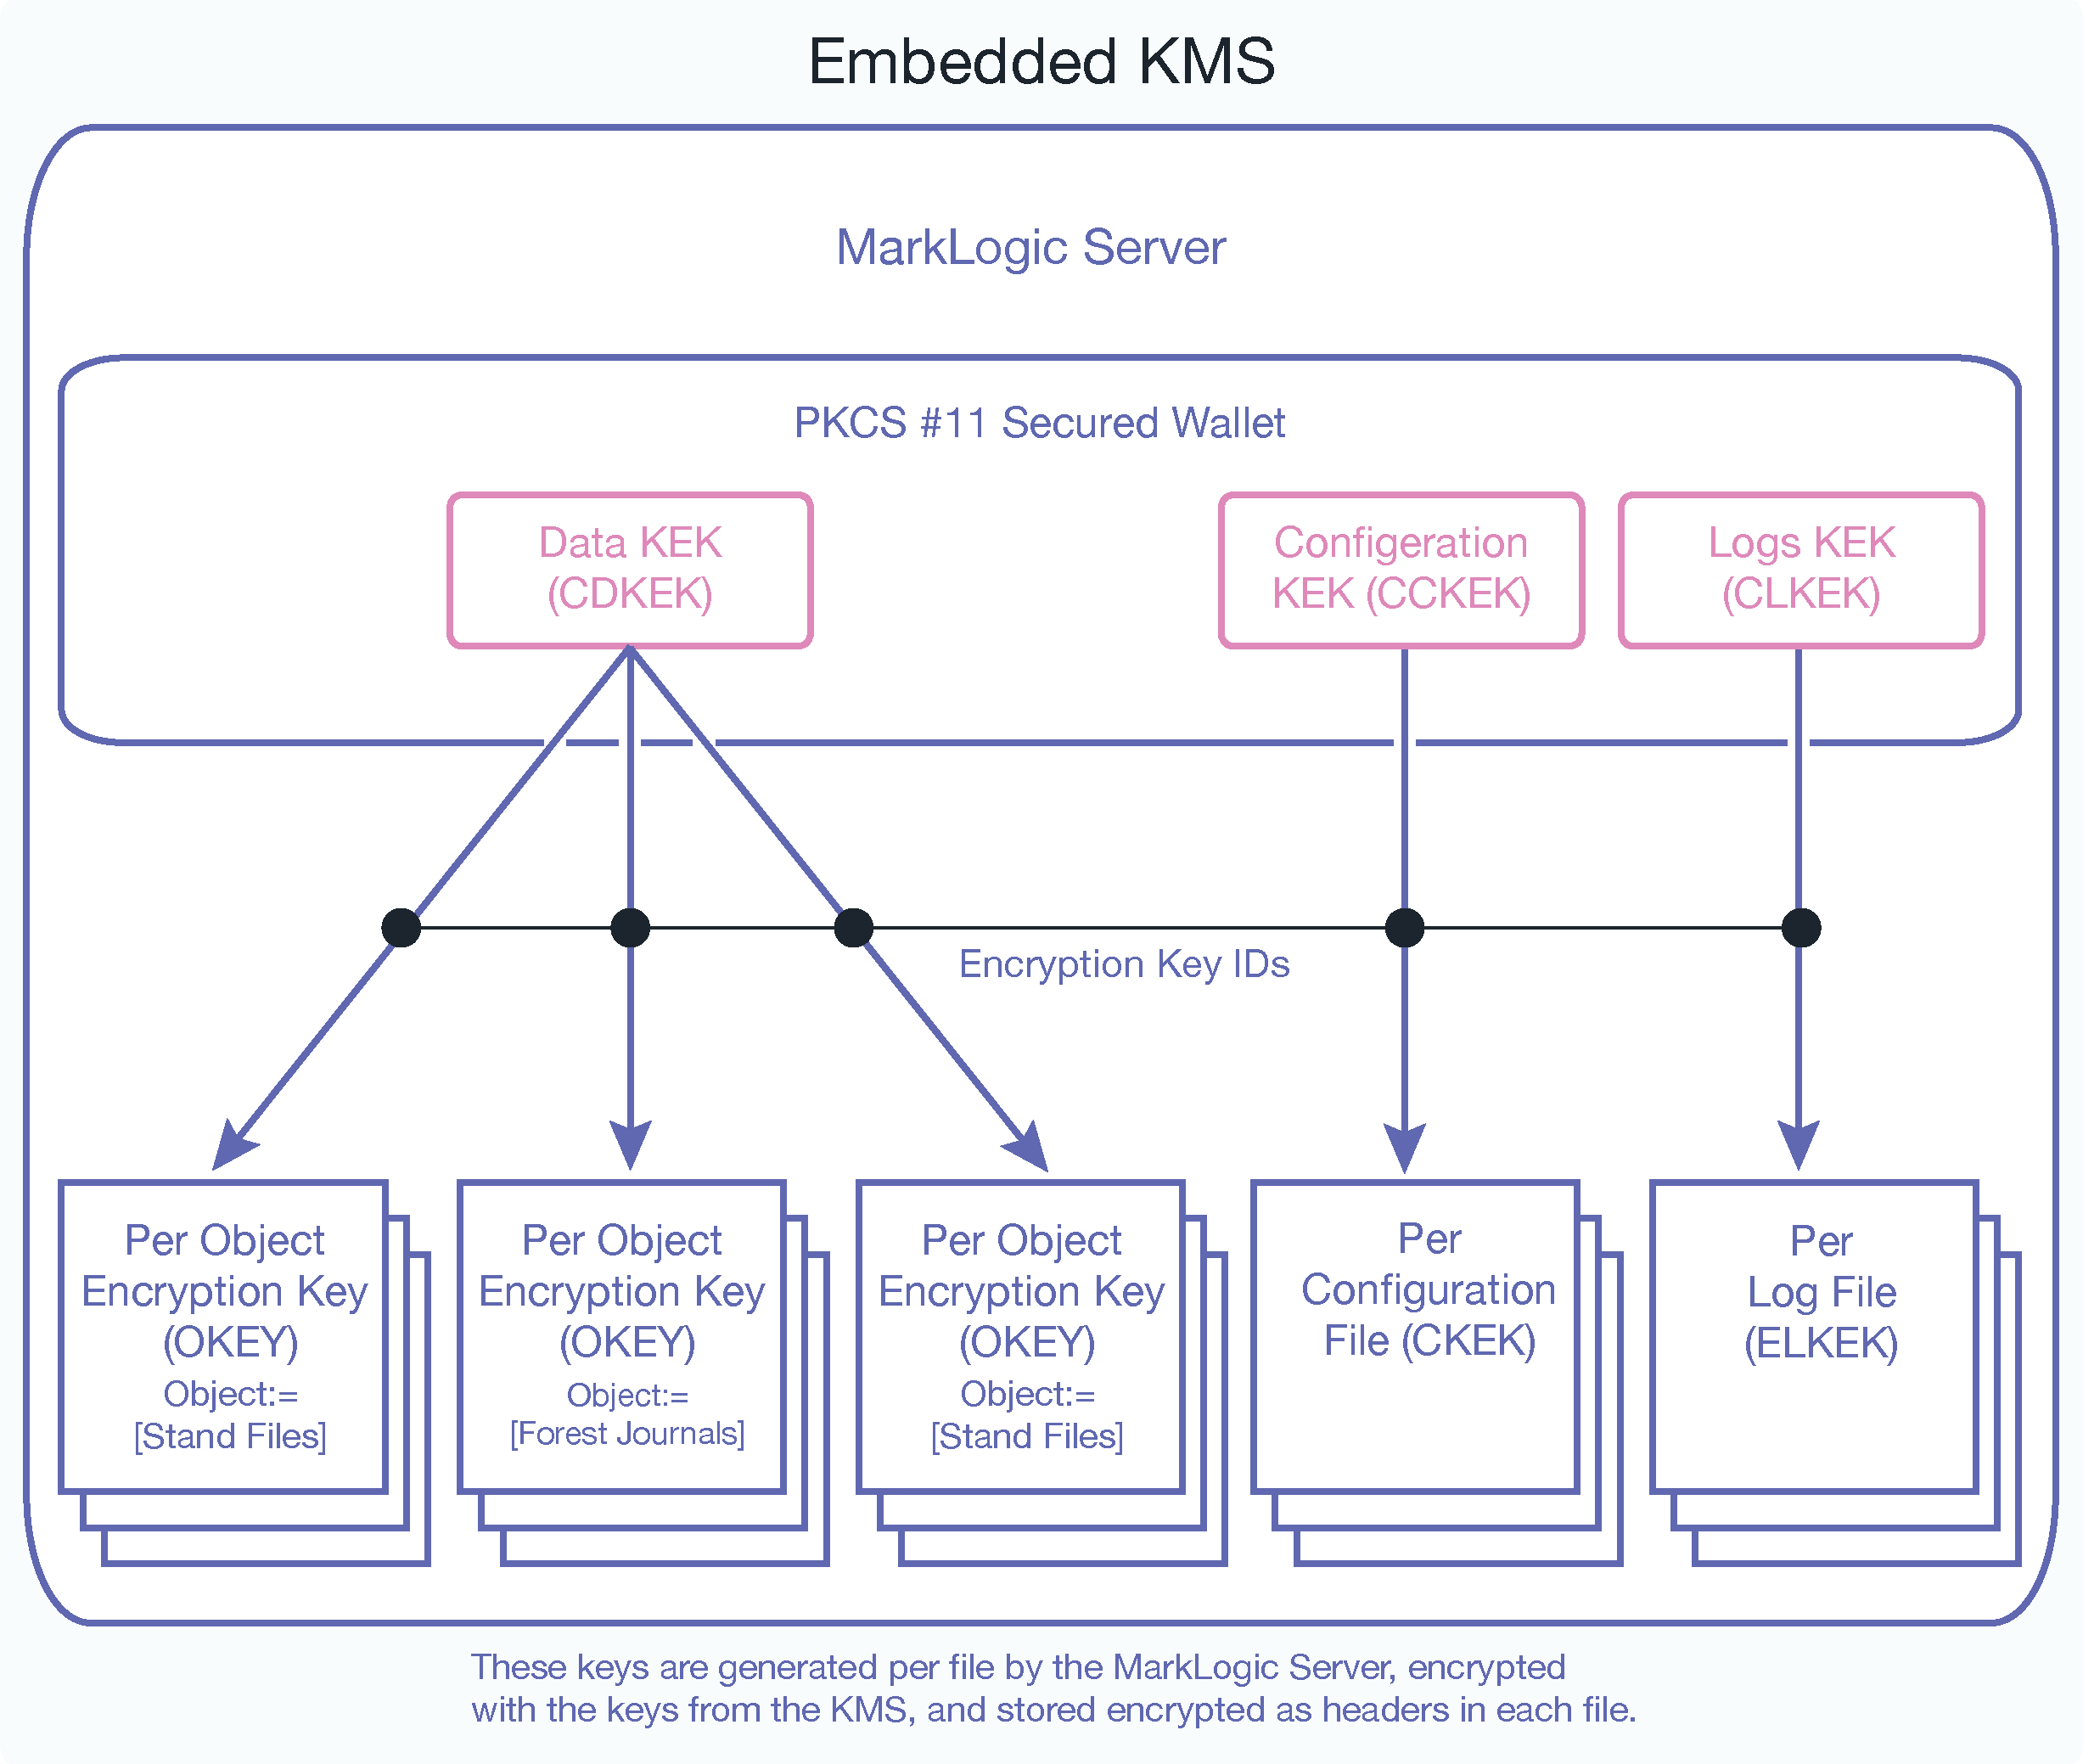 Diagram of embedded KMS key hierarchy